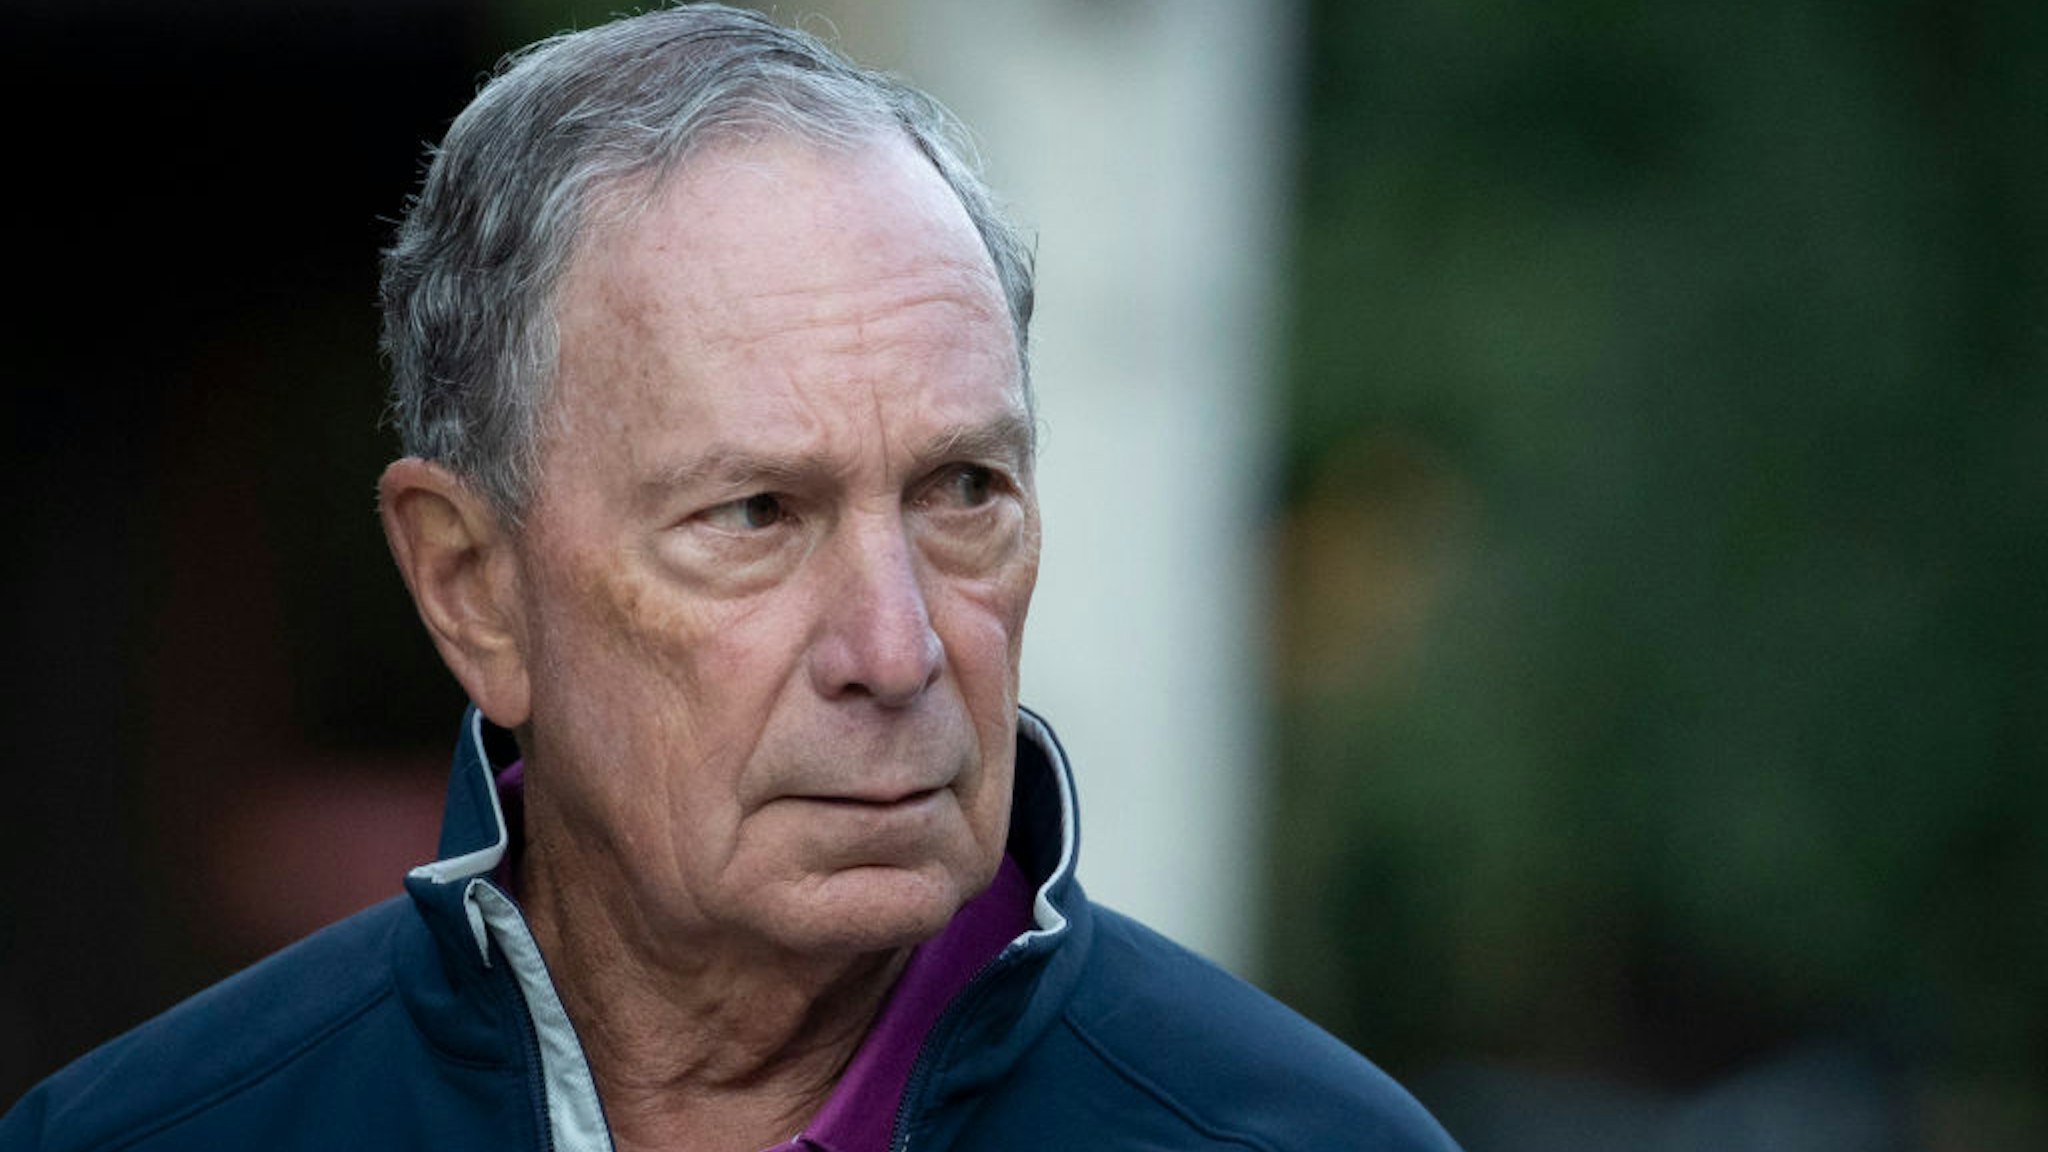 Michael Bloomberg attends the annual Allen & Company Sun Valley Conference